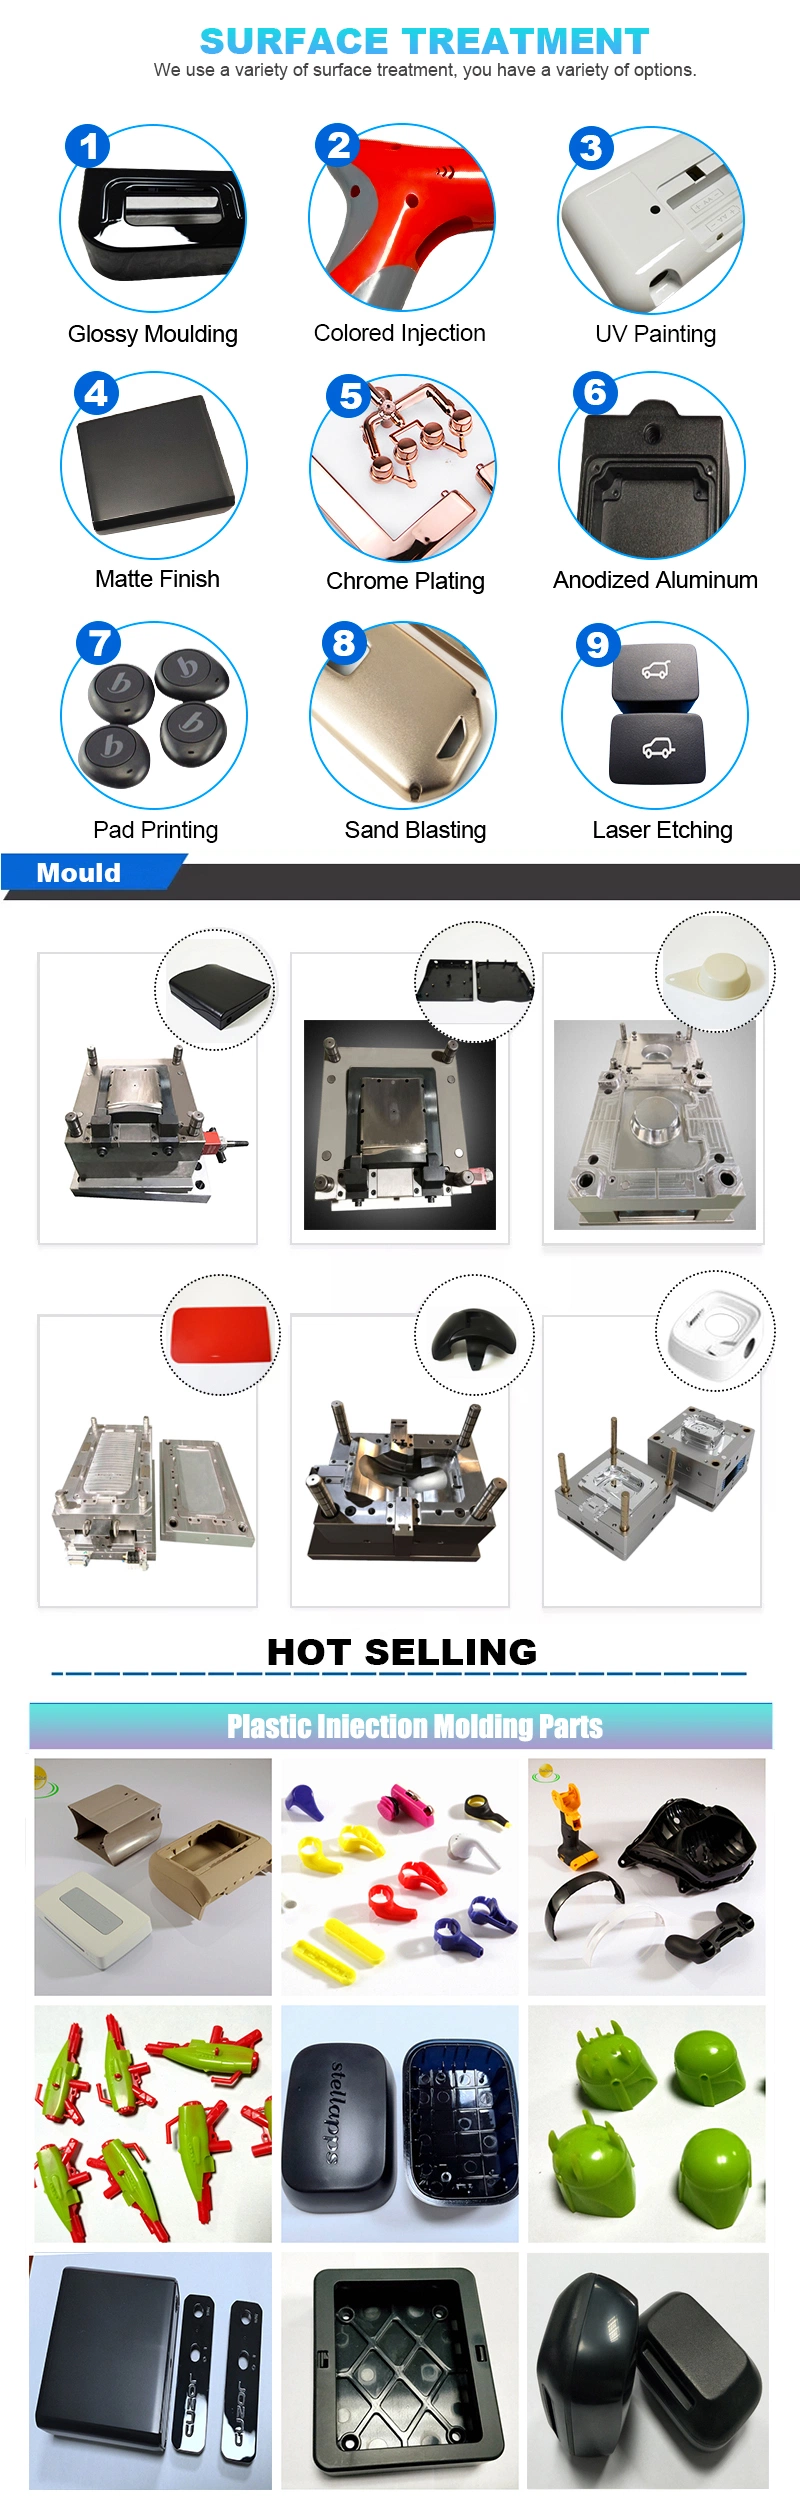 Custom Precision Double ABS/PP/Nylon/Rubber/Silicone Electronic/Automobile Small Plastic Injection Moulding/Molding Part